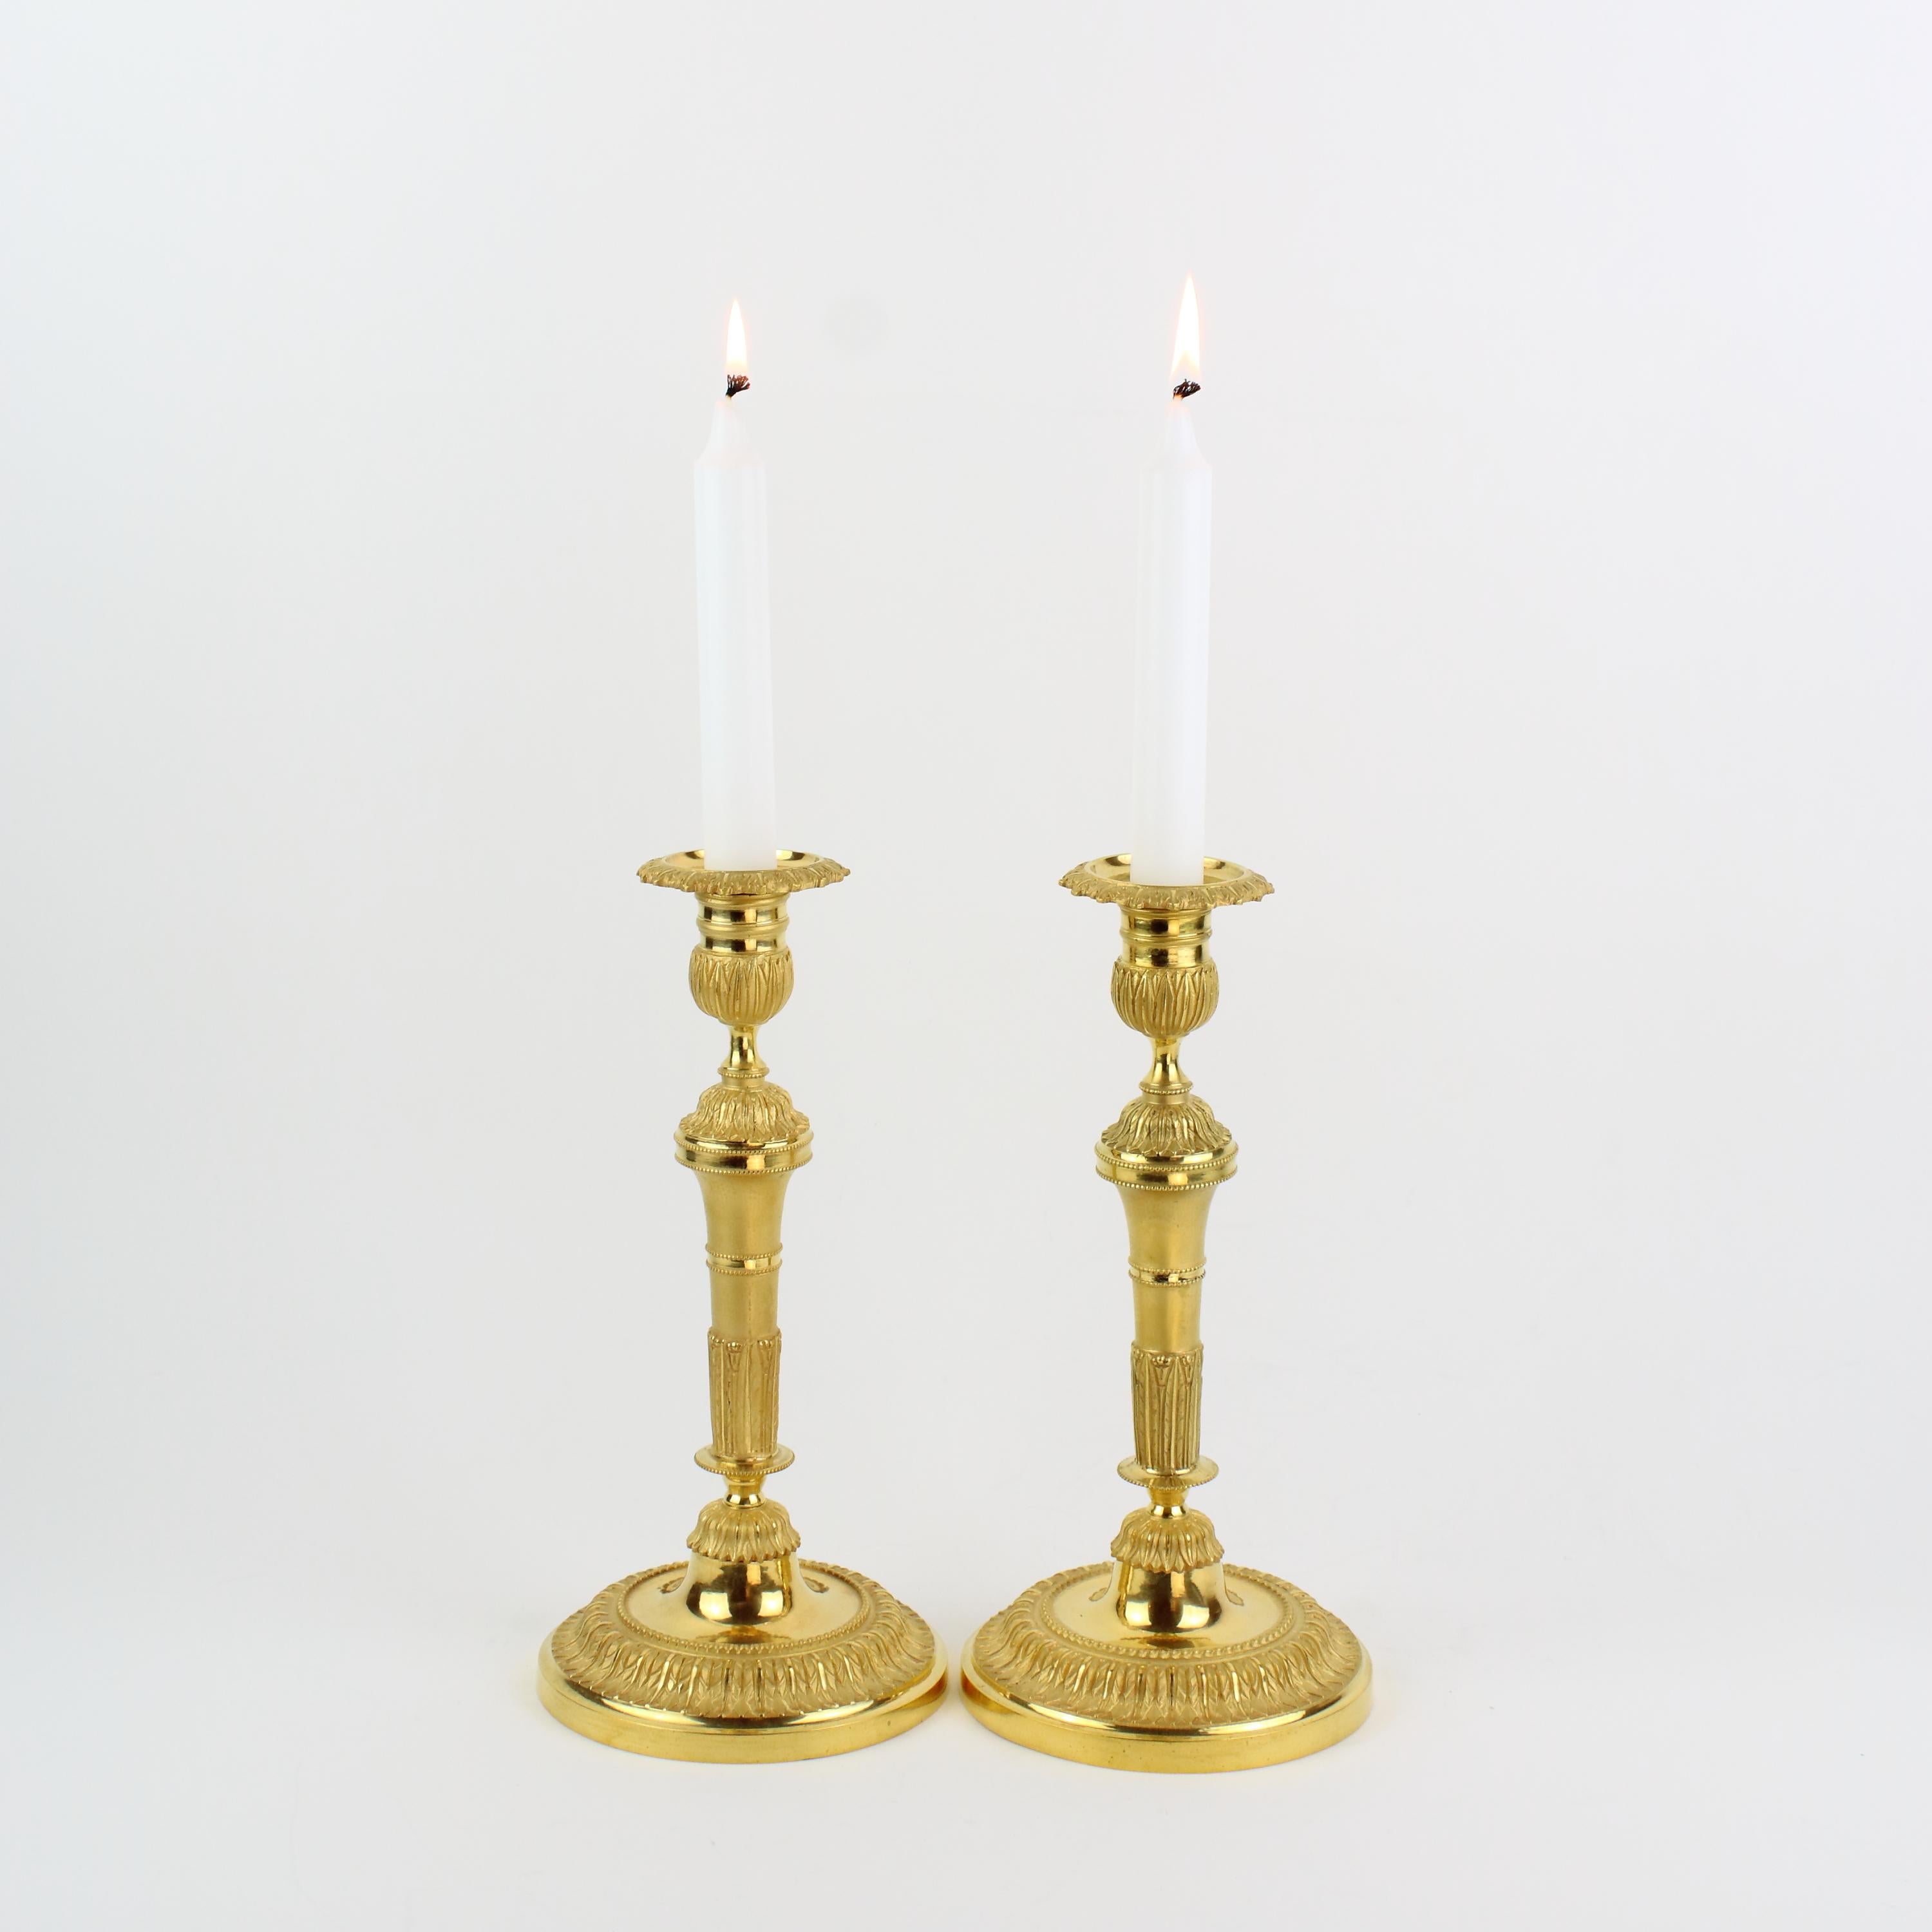 Pair of 18th century Louis XVI neoclassical gilt bronze candlesticks

The tapering stem with matte and polished gilt bronze parts decorated with lanceolate leaf foliage standing on a round and slightly domed foot showing the same foliage